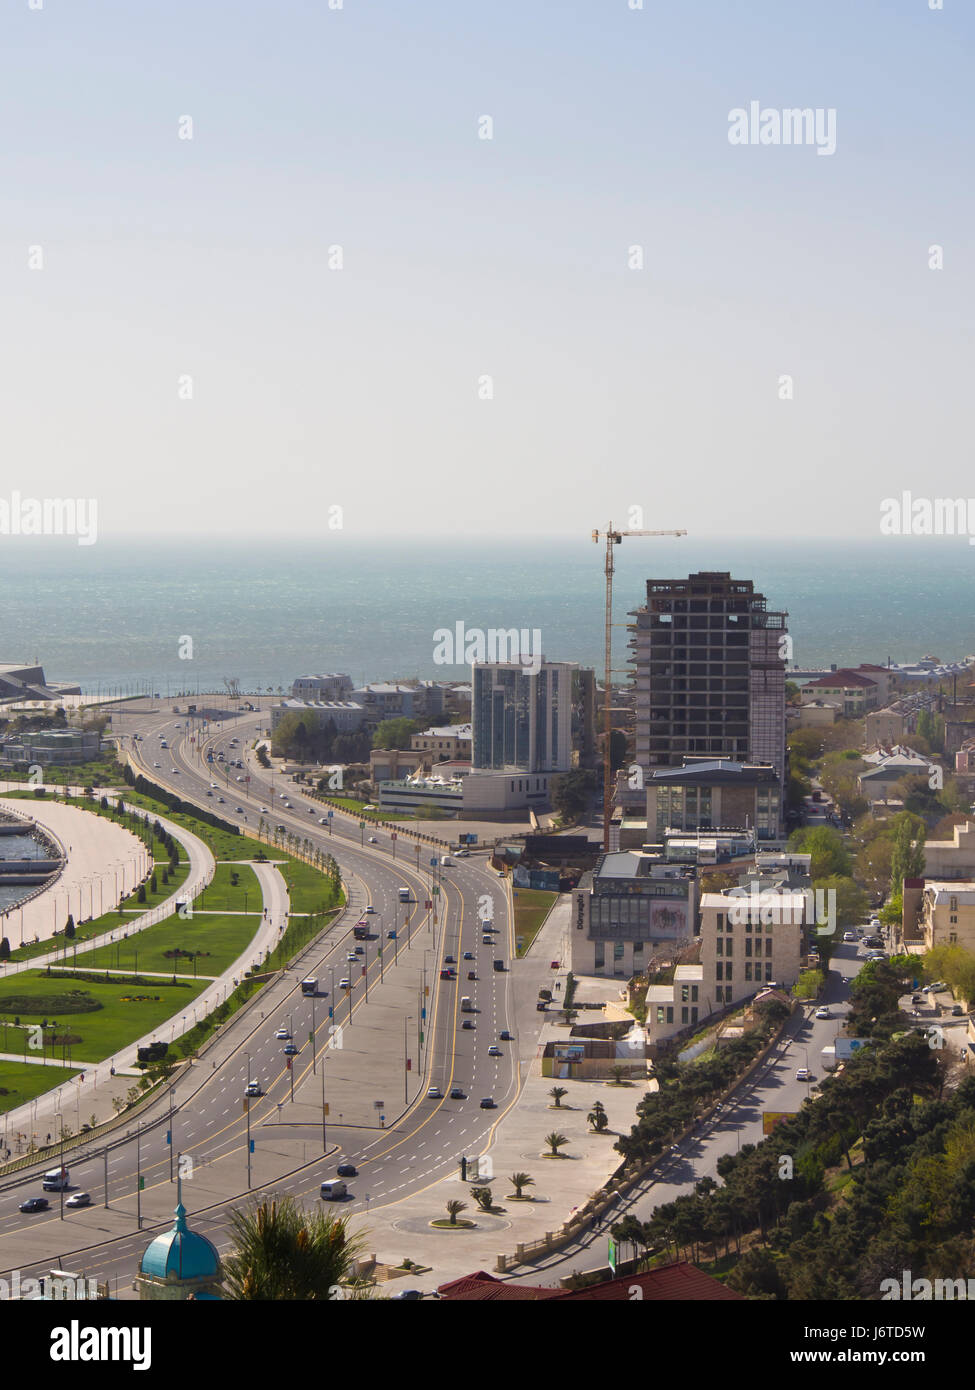 Baku, the capital city of Azerbaijan, on the shore of the Caspian sea, view of the E119 highway exiting to the south from the Dagustu park Stock Photo